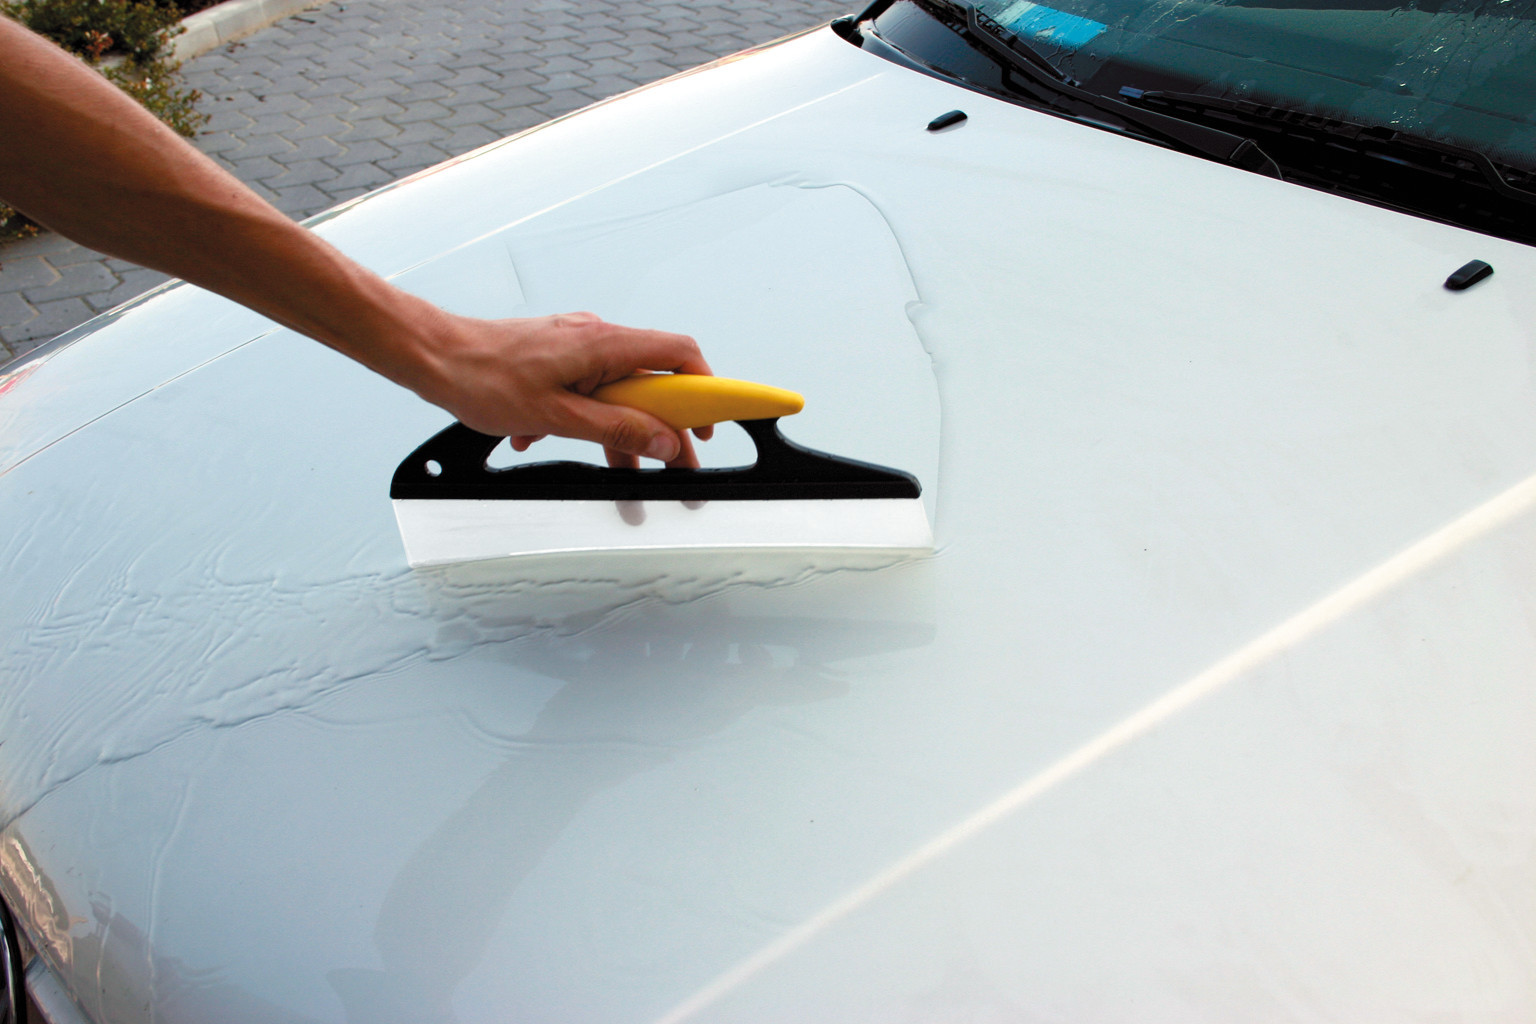 Whipe-Dry, squeegee car dryer thumb